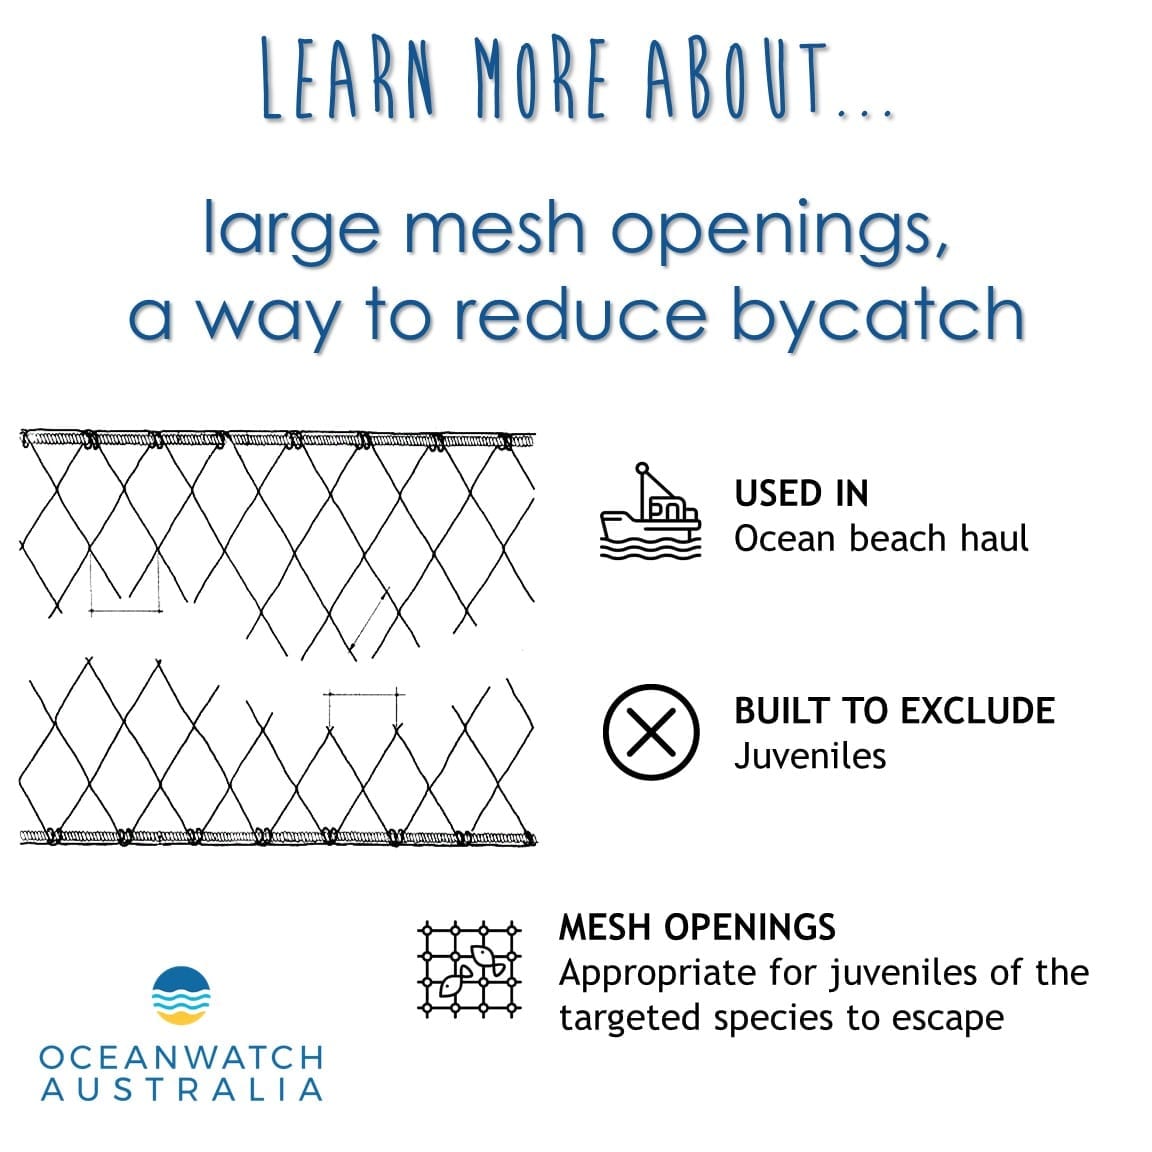 To reduce the bycatch of juveniles, and non-target species the mesh netting used in the ocean beach haul fishery is altered to have larger mesh openings depending on size and morphology of the targeted fish species. The size and shape of the mesh openings, as well as the type of netting material are all important to ensure only targeted species are captured. This method is useful when professional fishermen are targeting demersal fish like Yellowfin Bream and Luderick.